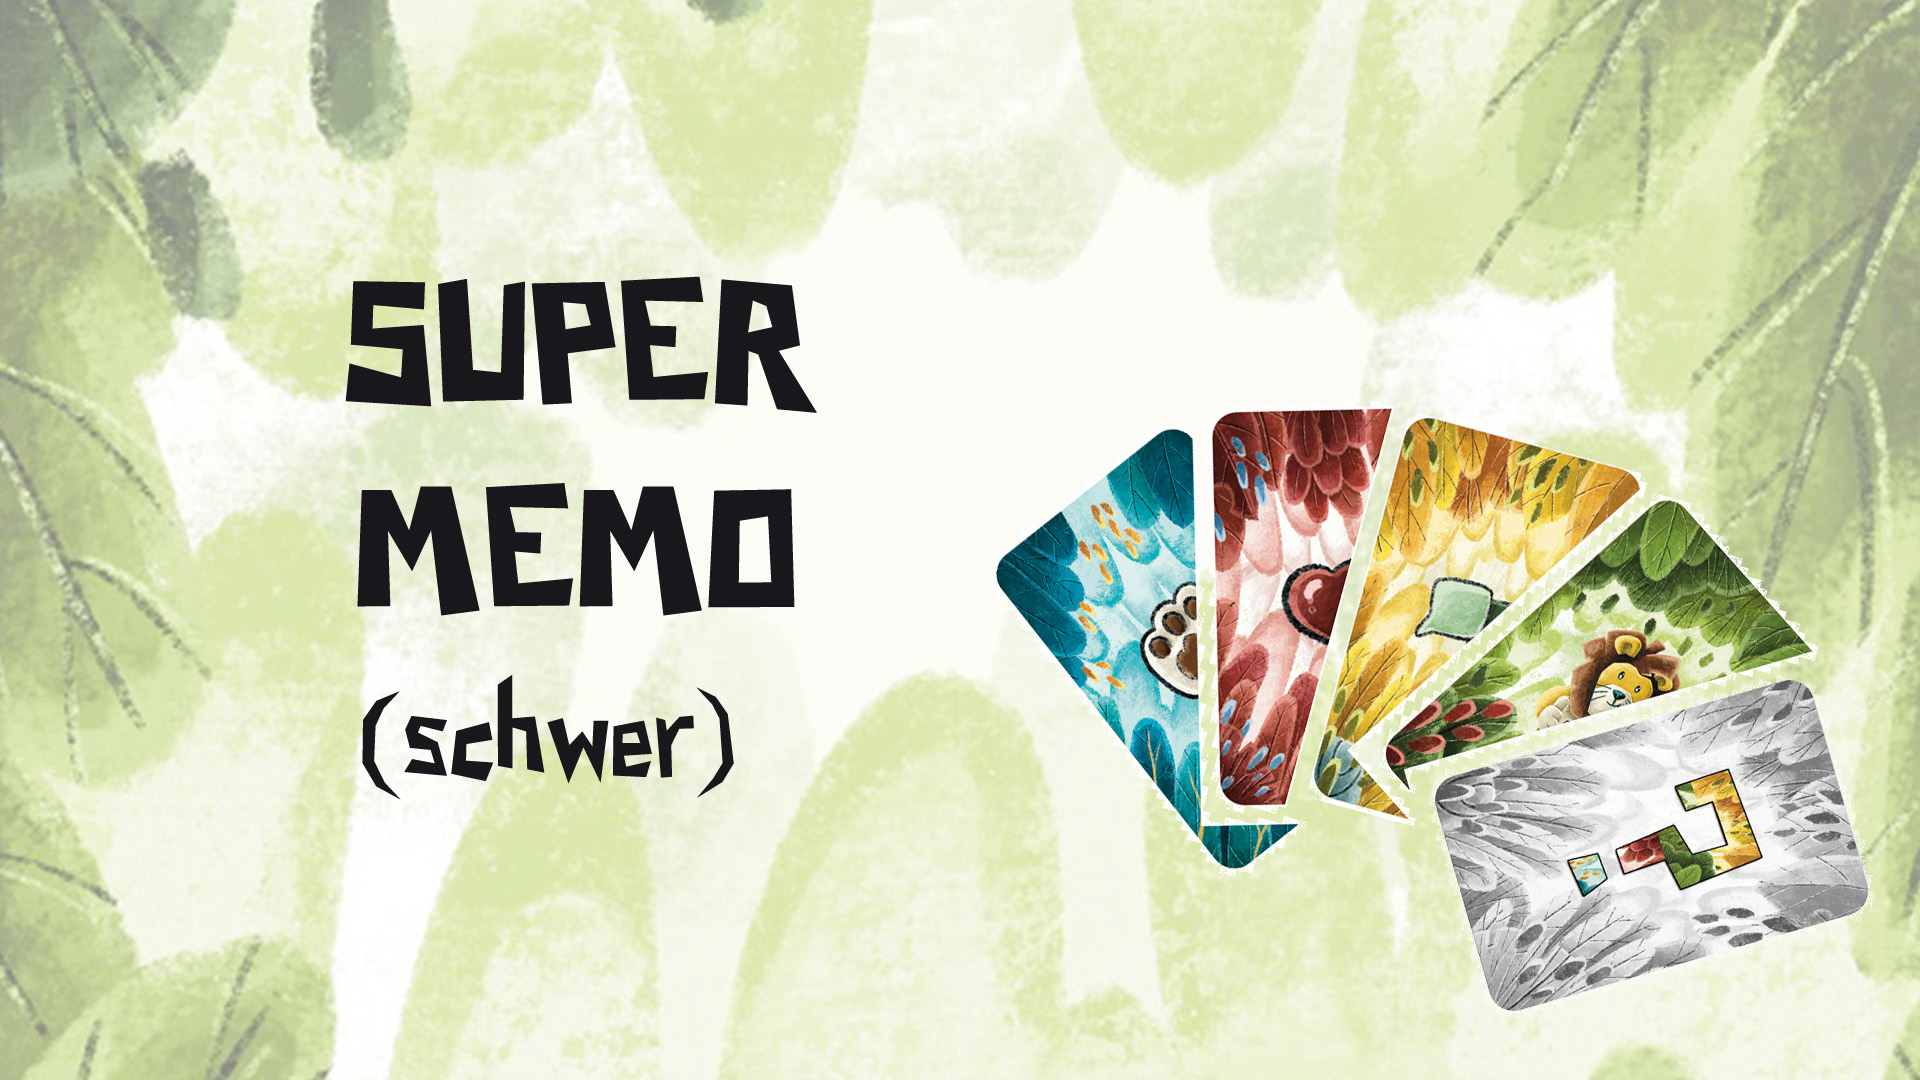 You are currently viewing Super – Memo (schwer)